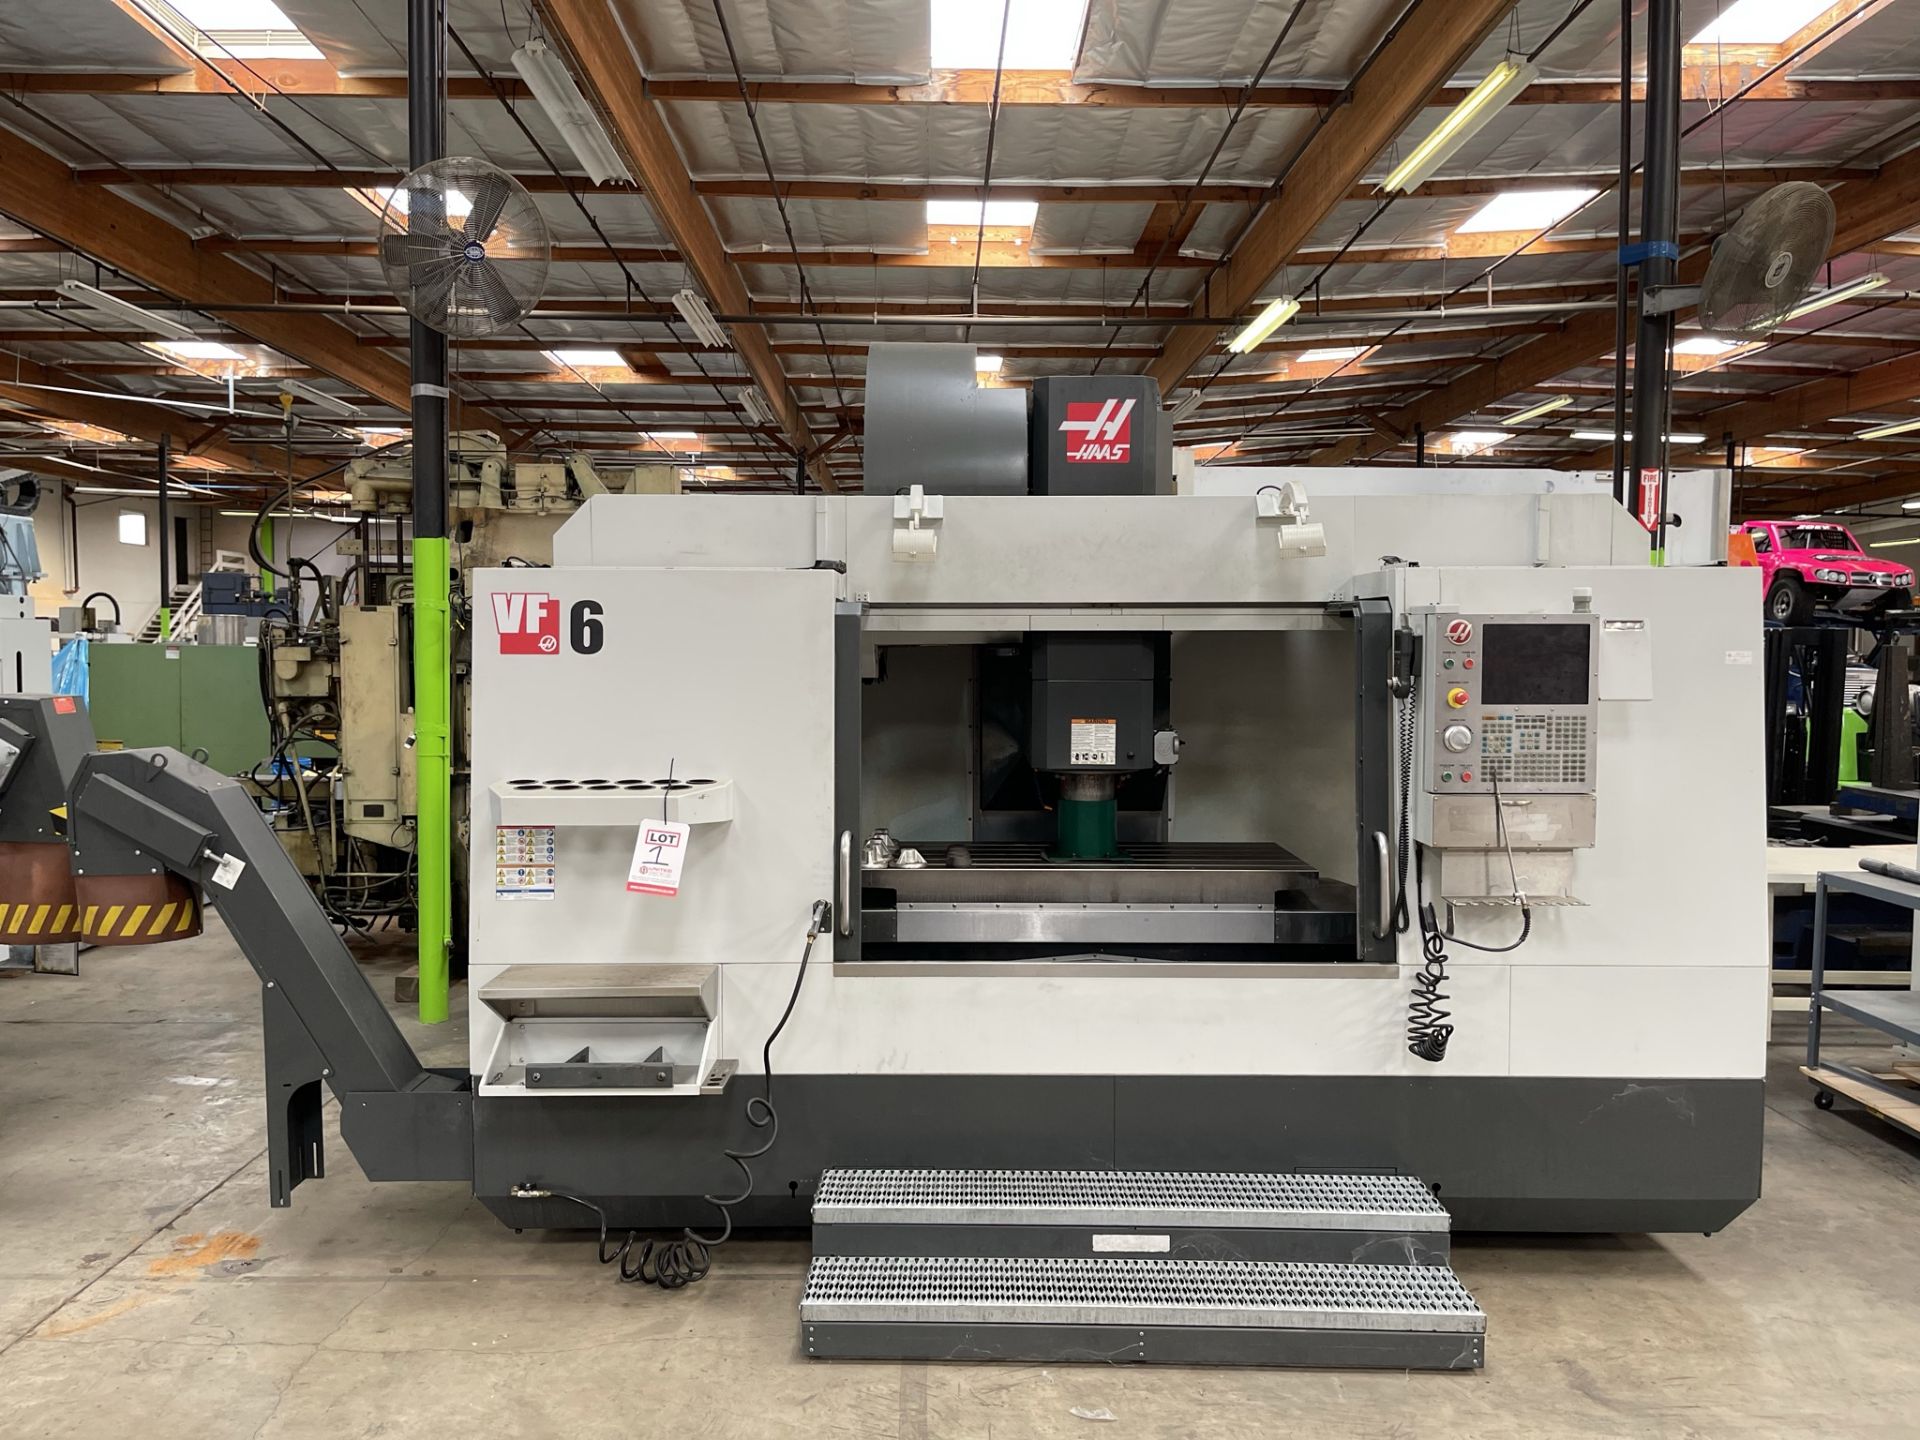 2014 HAAS VF-6/50 VERTICAL MACHINING CENTER, XYZ TRAVELS: 64" X 32" X 30", 84" X 36" TABLE, 7500 RPM - Image 2 of 24